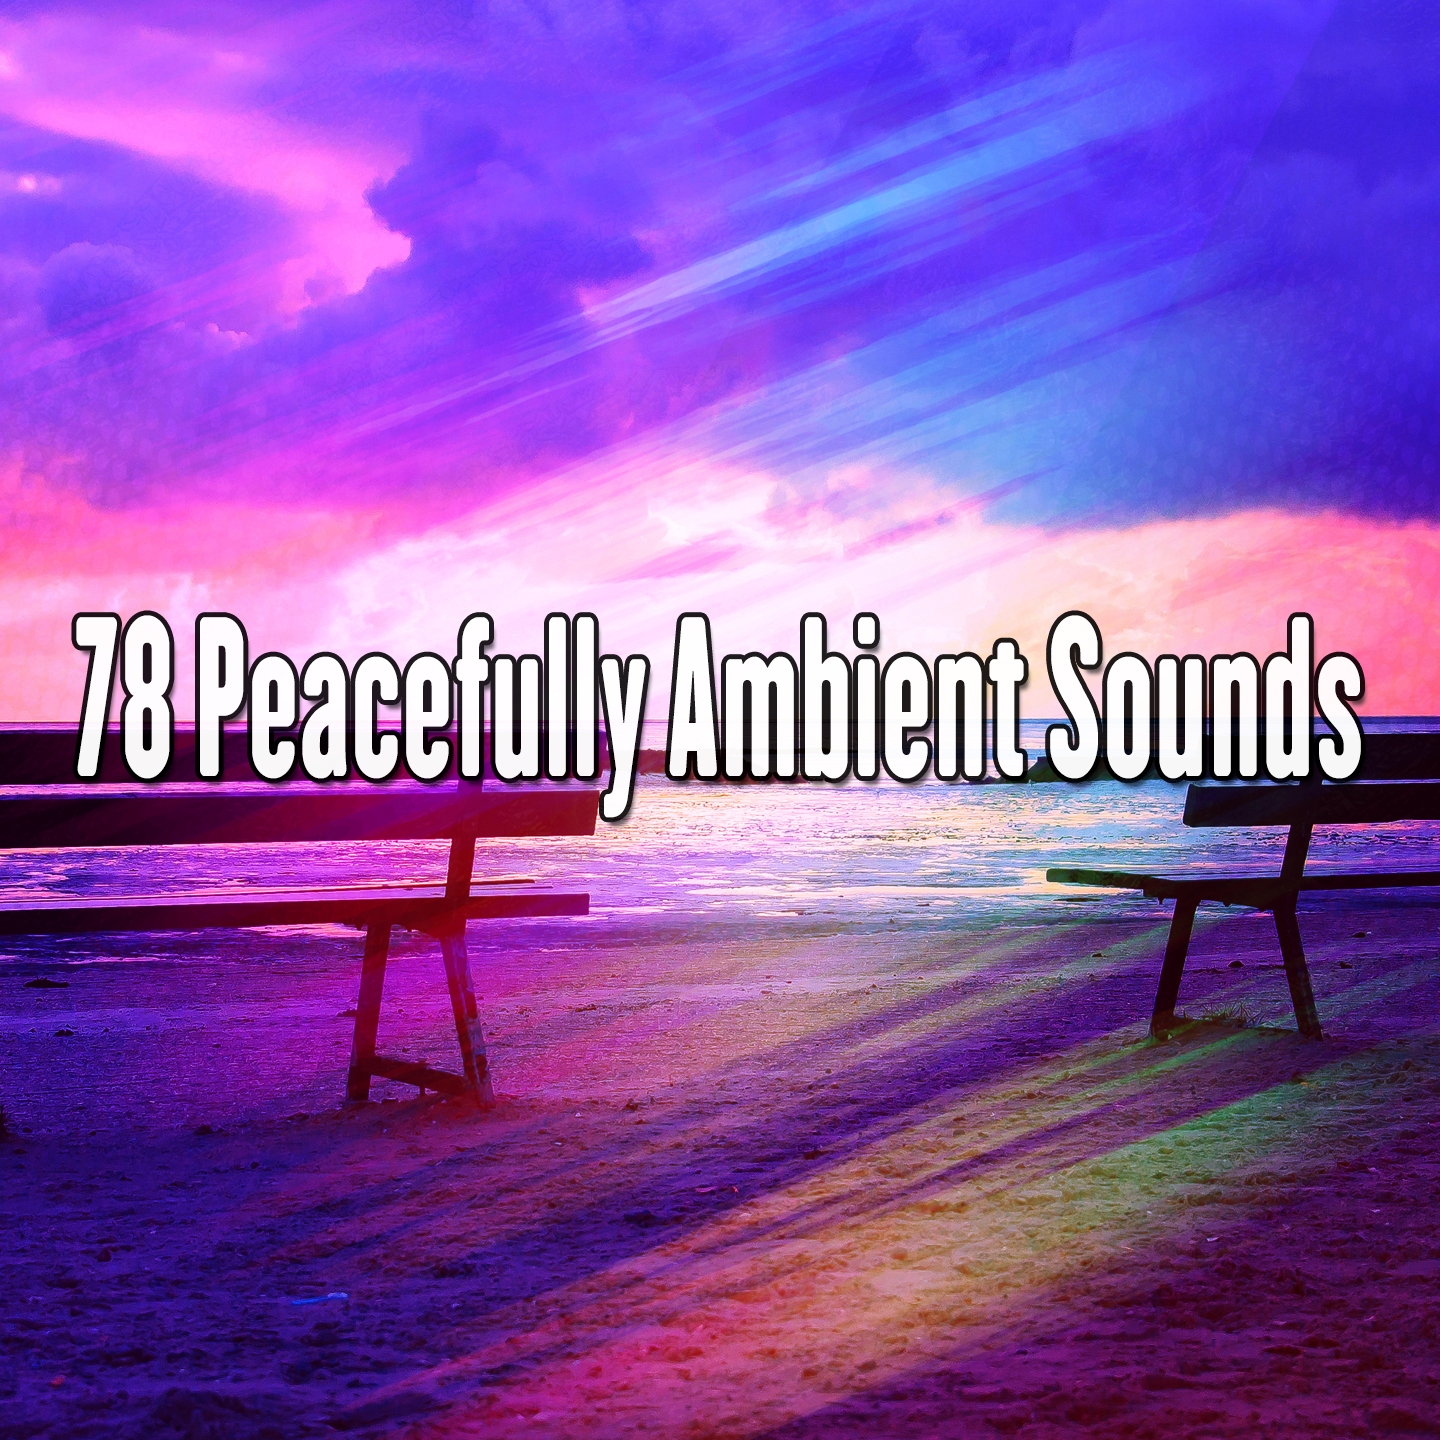 78 Peacefully Ambient Sounds